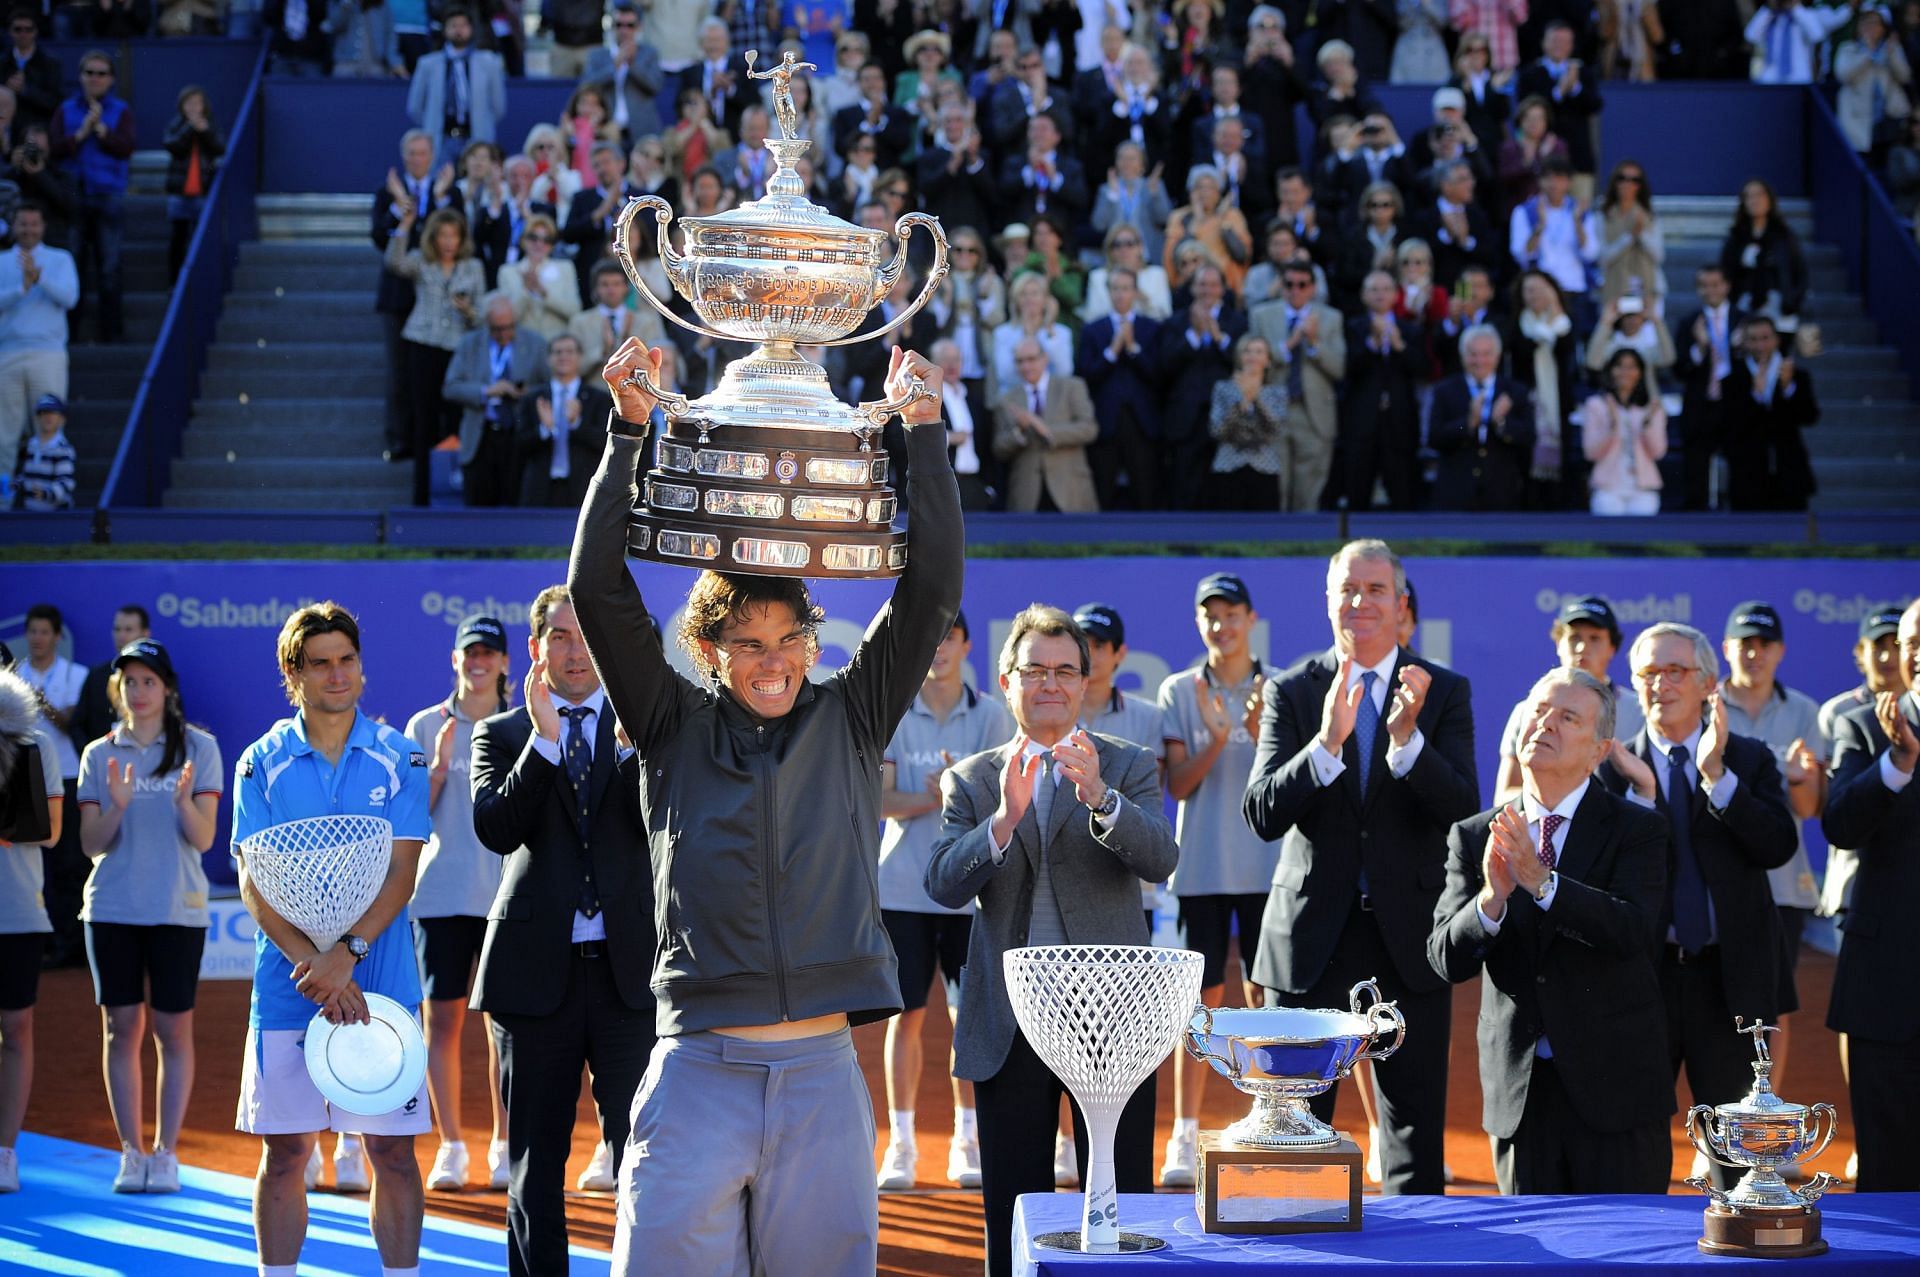 Rafael Nadal after beating David Ferrer in the 2012 Barcelona Open Final